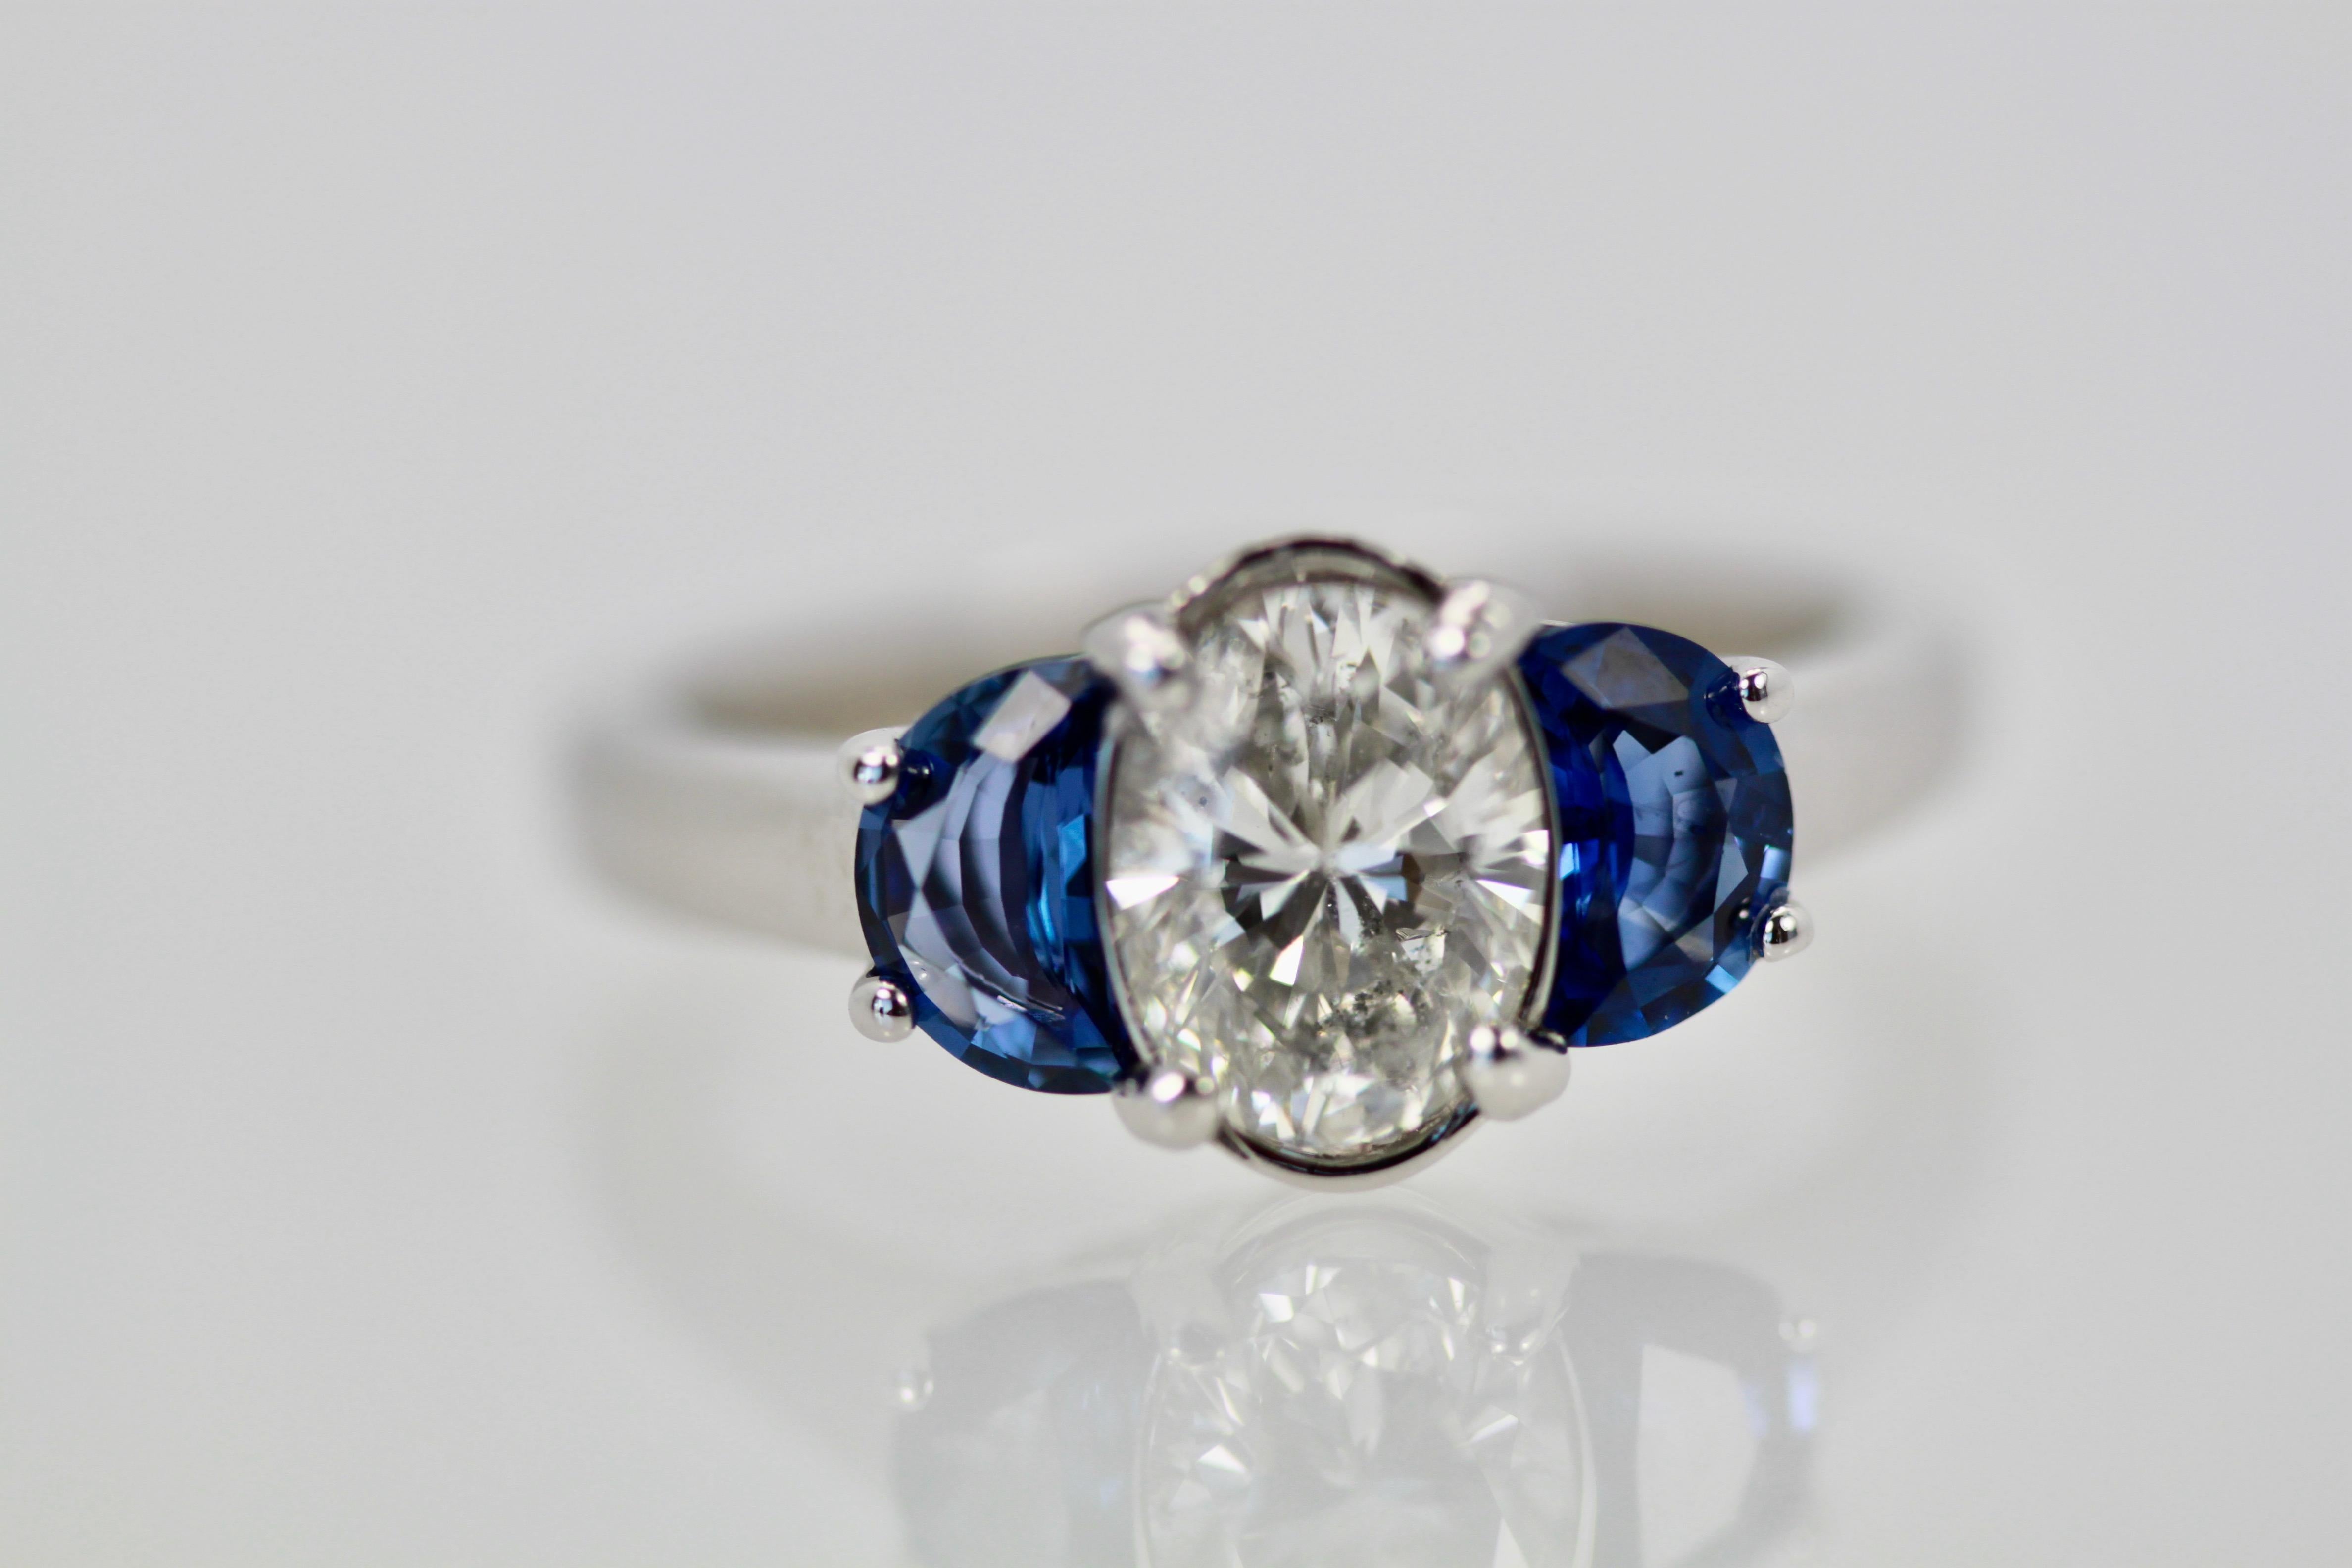 This ring is unusual as it has a center oval cut Diamond of 1.20 carats and enhanced by moon cut Sapphires of 1/2 carat each totaling 2.20 tcw.  The ring is sized 6 1/4 and can be enlarged or made smaller.  It weighs 4.8 grams.  This ring is perfect